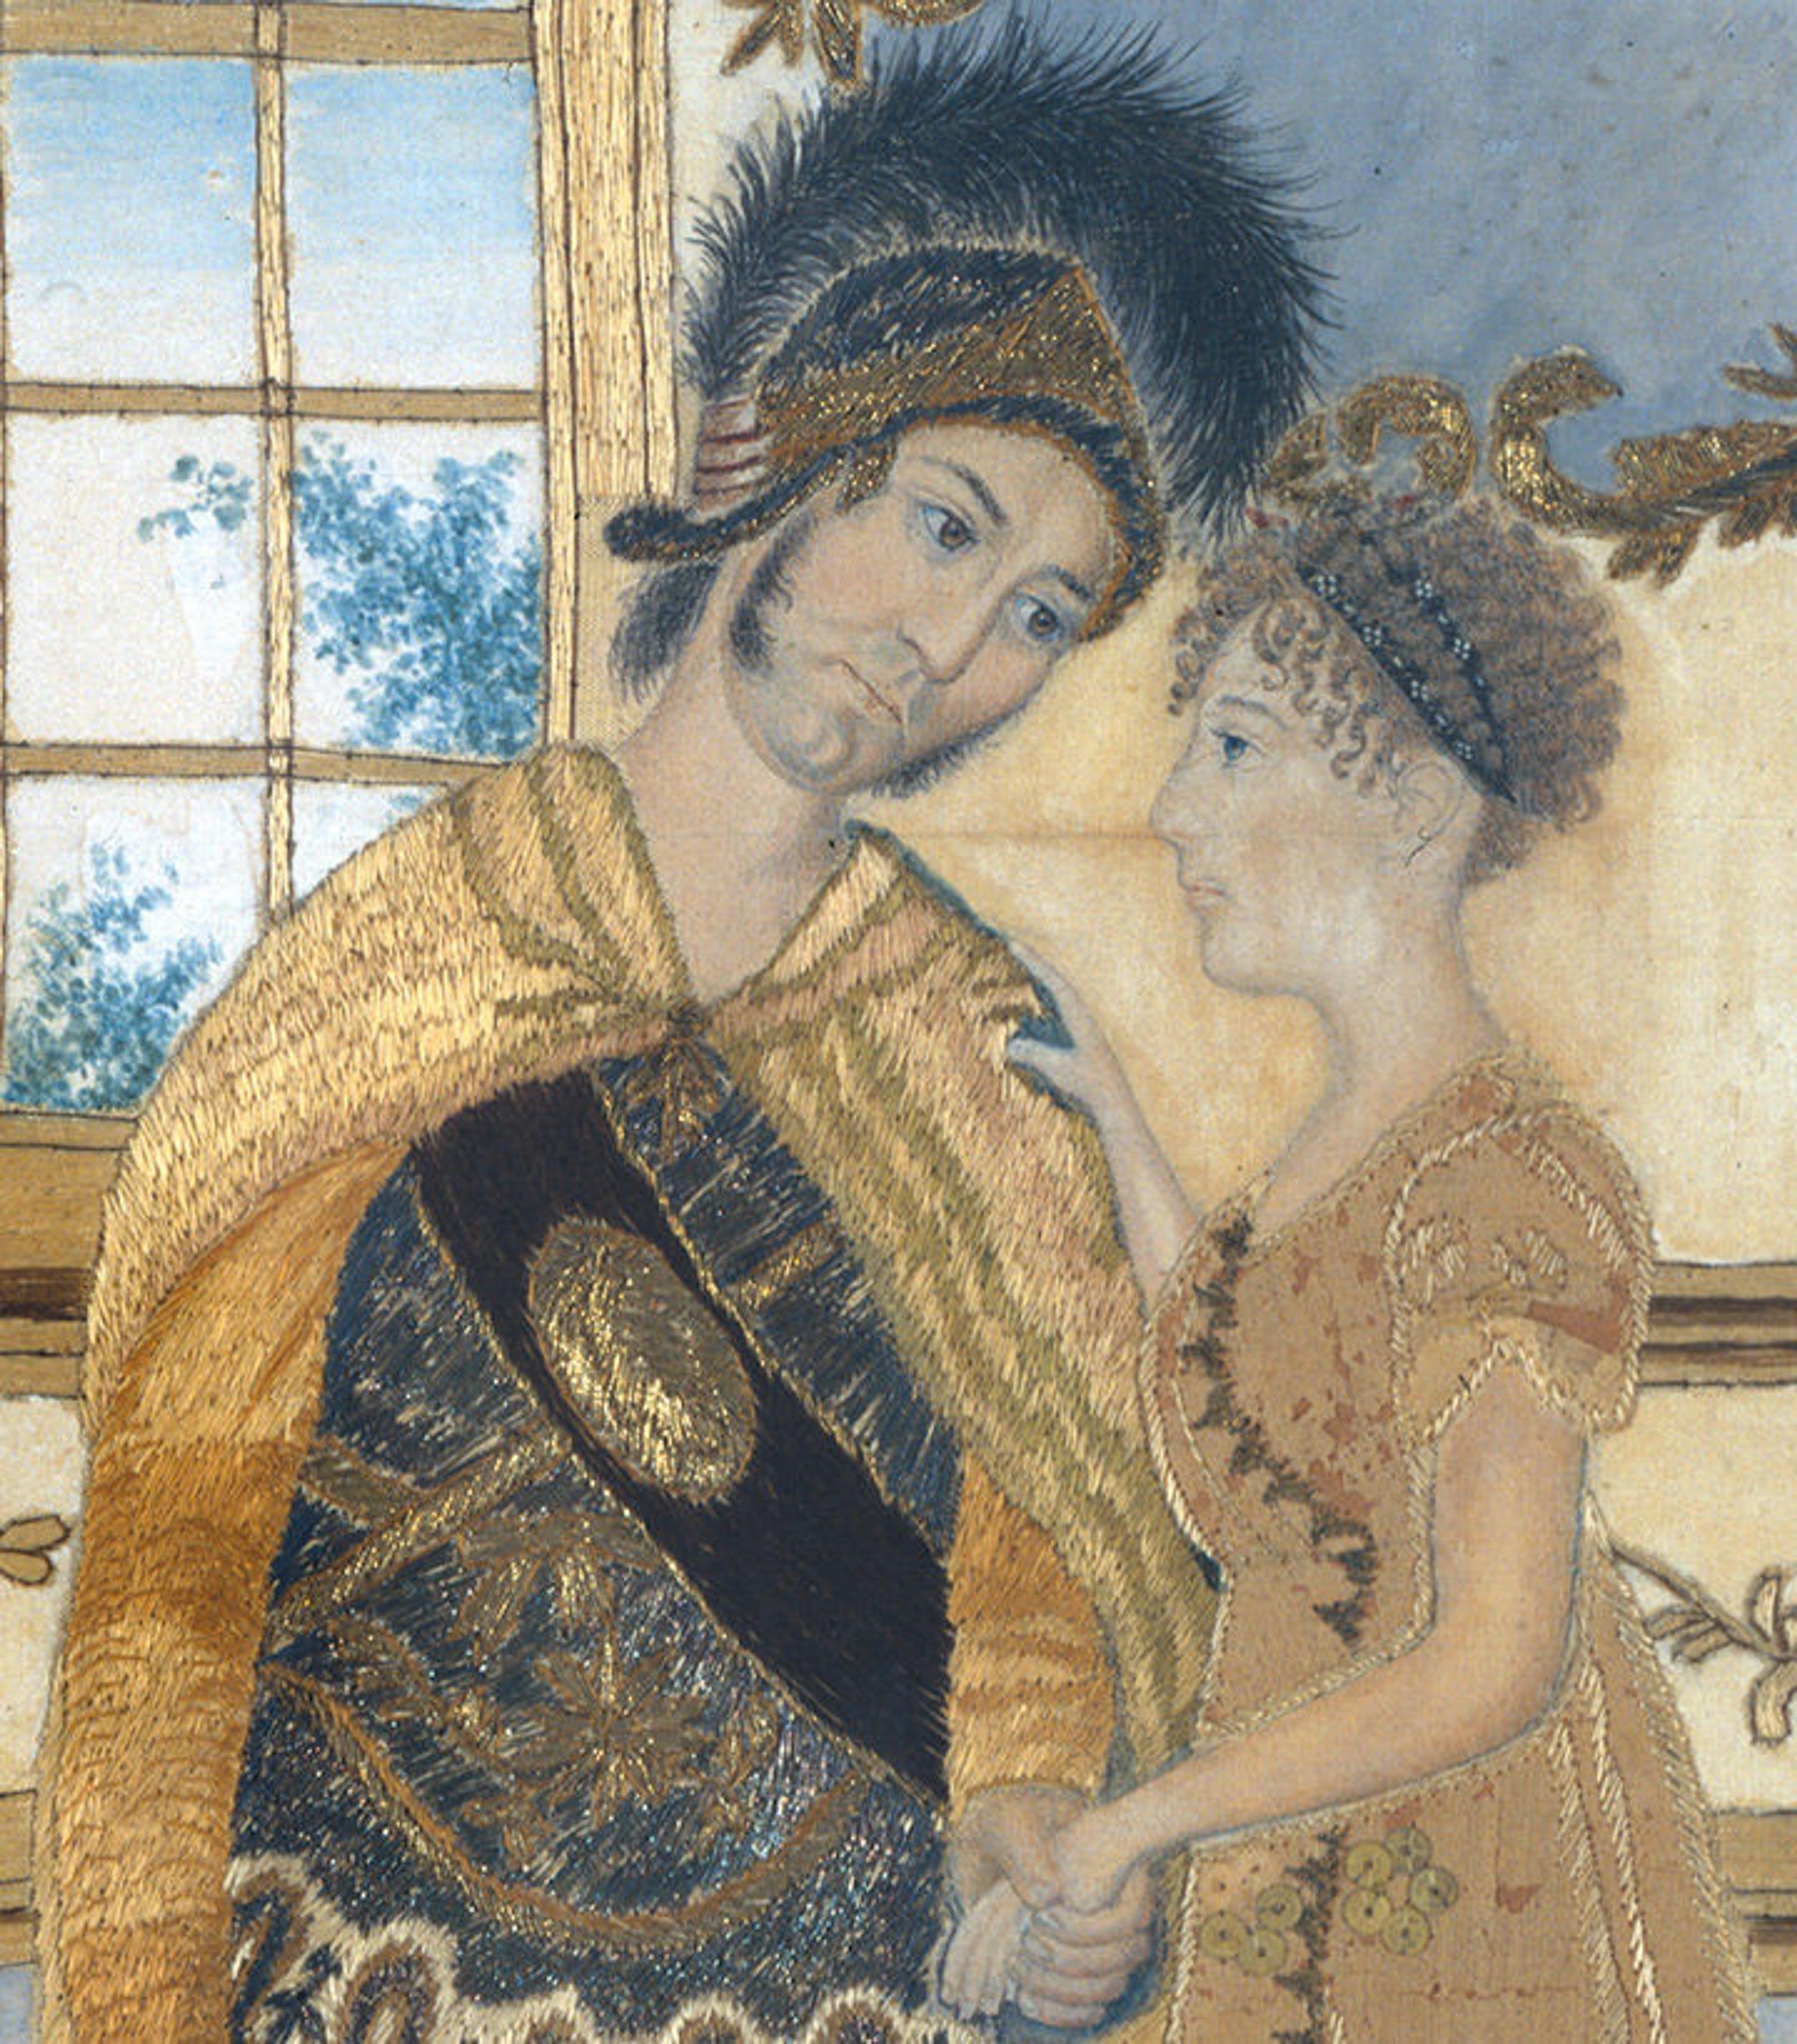 Detail of a sampler by Lucy Huntington shows warrior Hector embracing his wife farewell in their home. Hector wears ornate armor decorated with gold and his wife a sequined dress.